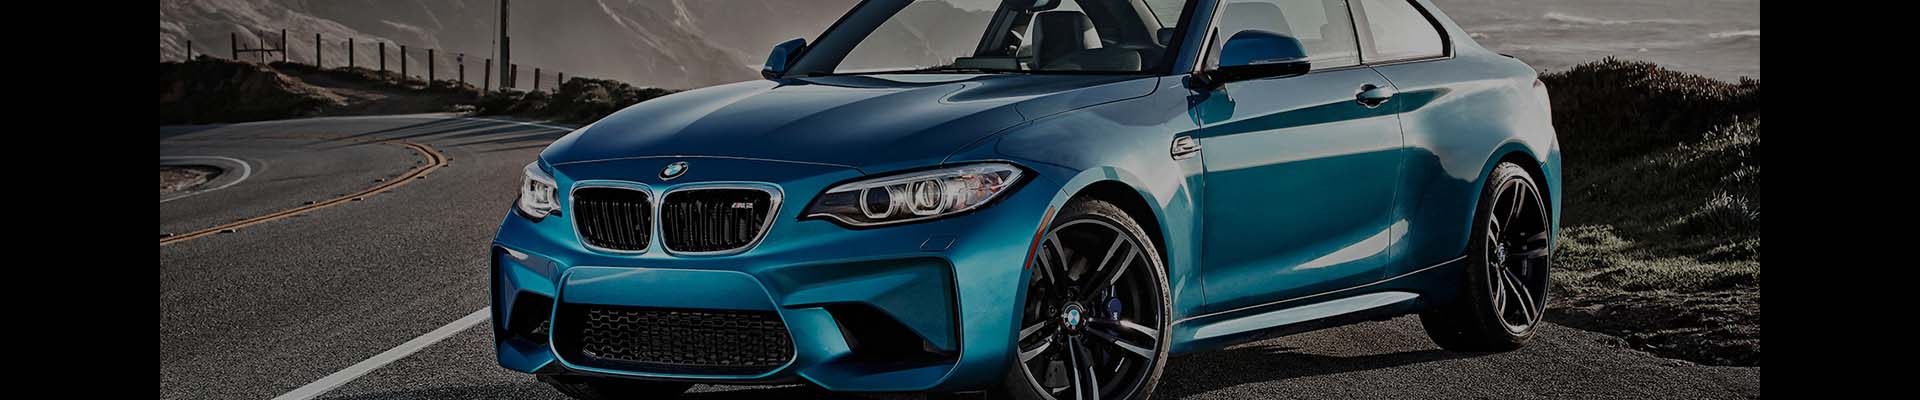 Shop Replacement and OEM BMW Parts with Discounted Price on the Net